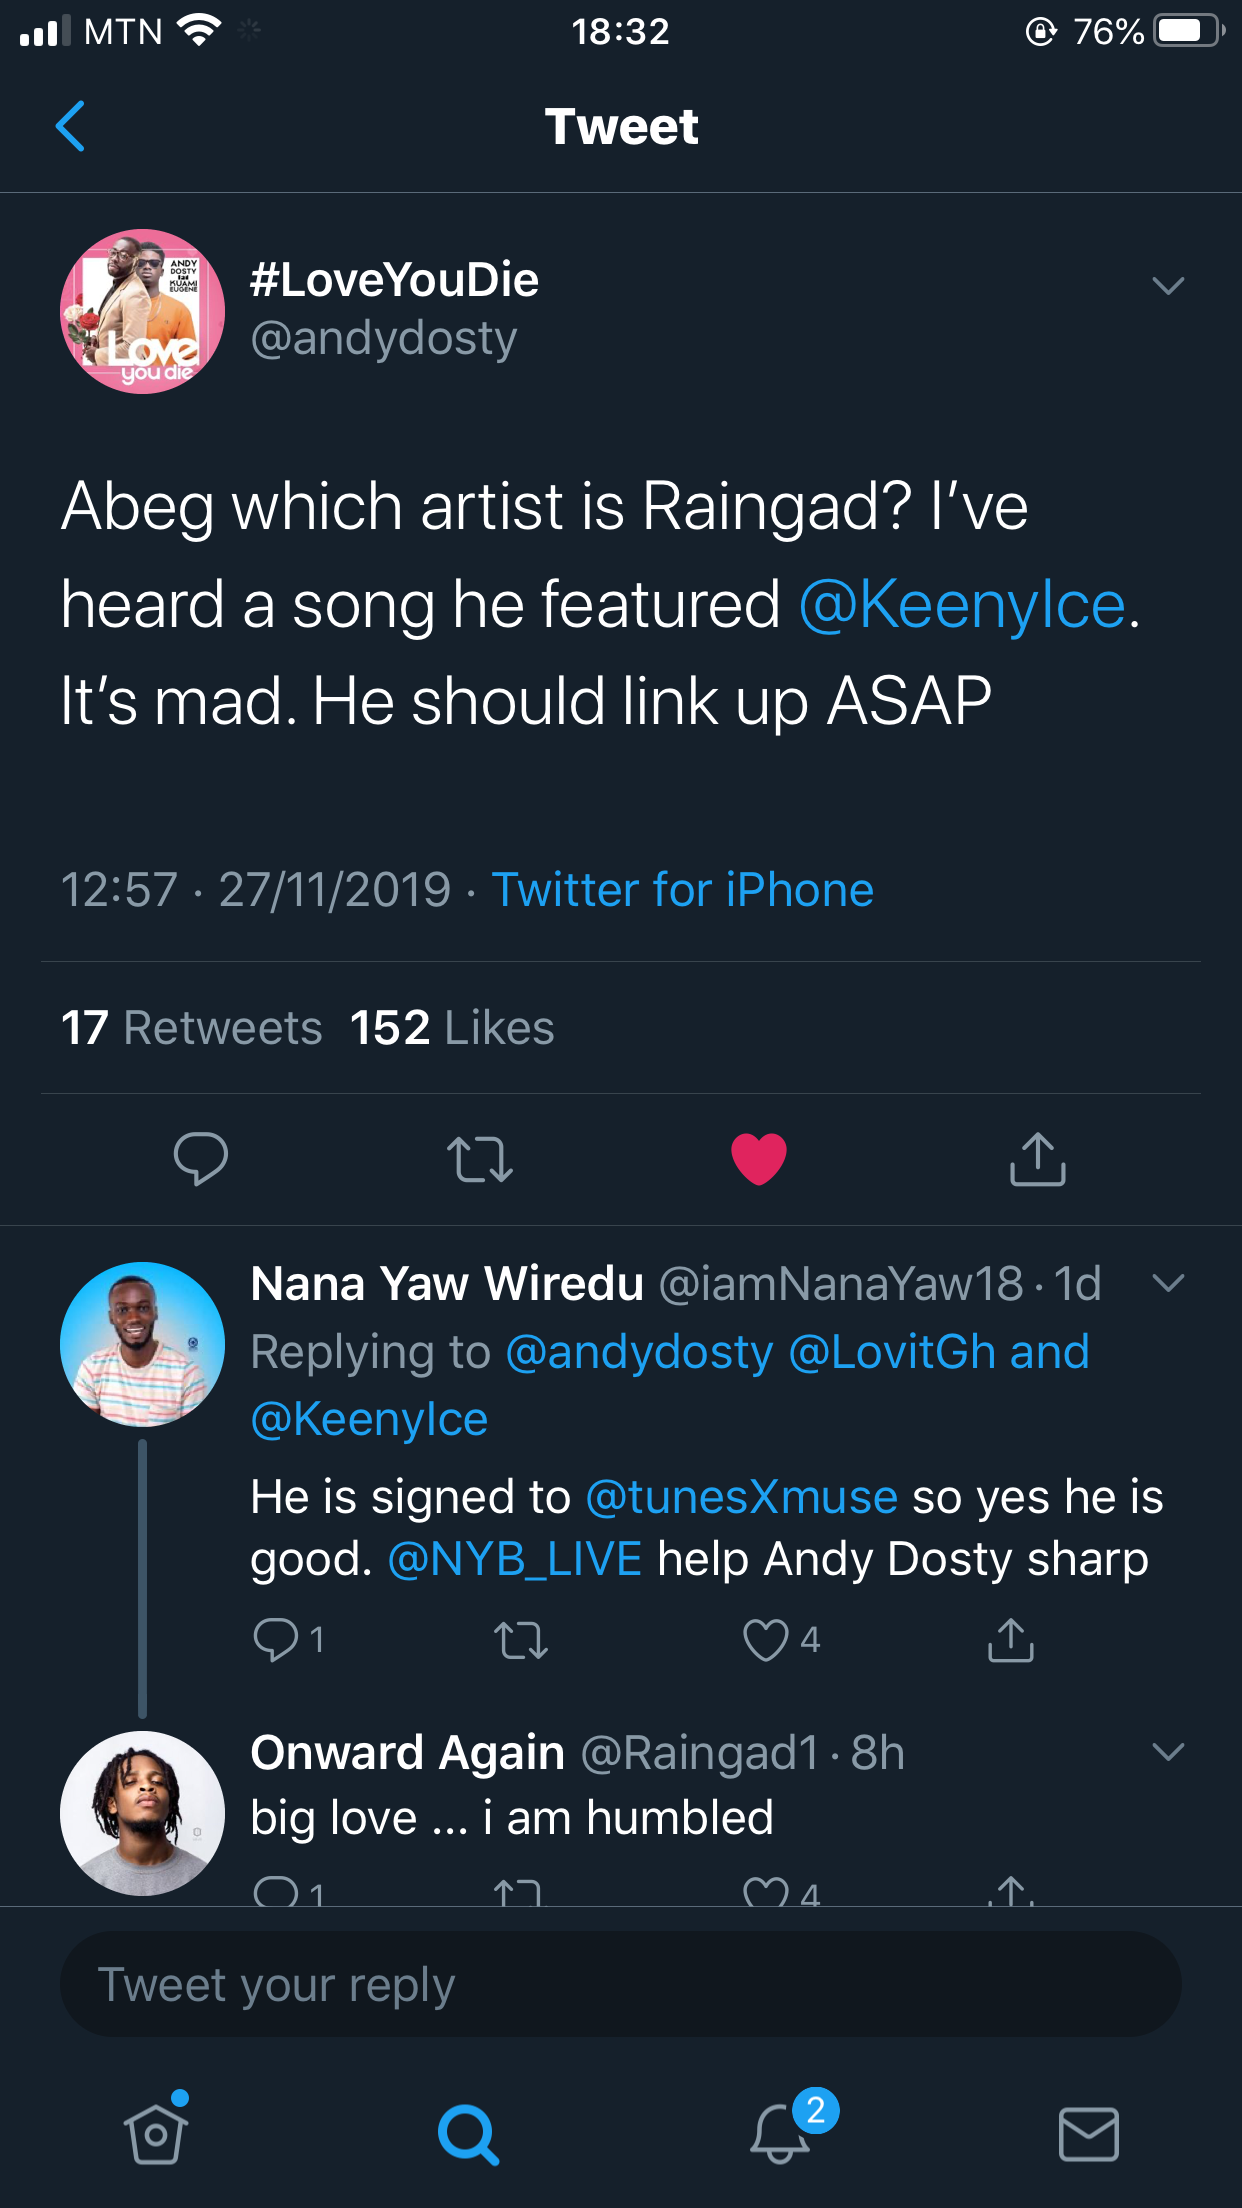 Ghanaian Disc Jokey and popular morning show host, Andy Dosty has endorsed Fast-rising Ghanaian artiste, Raingad’s Junction song.